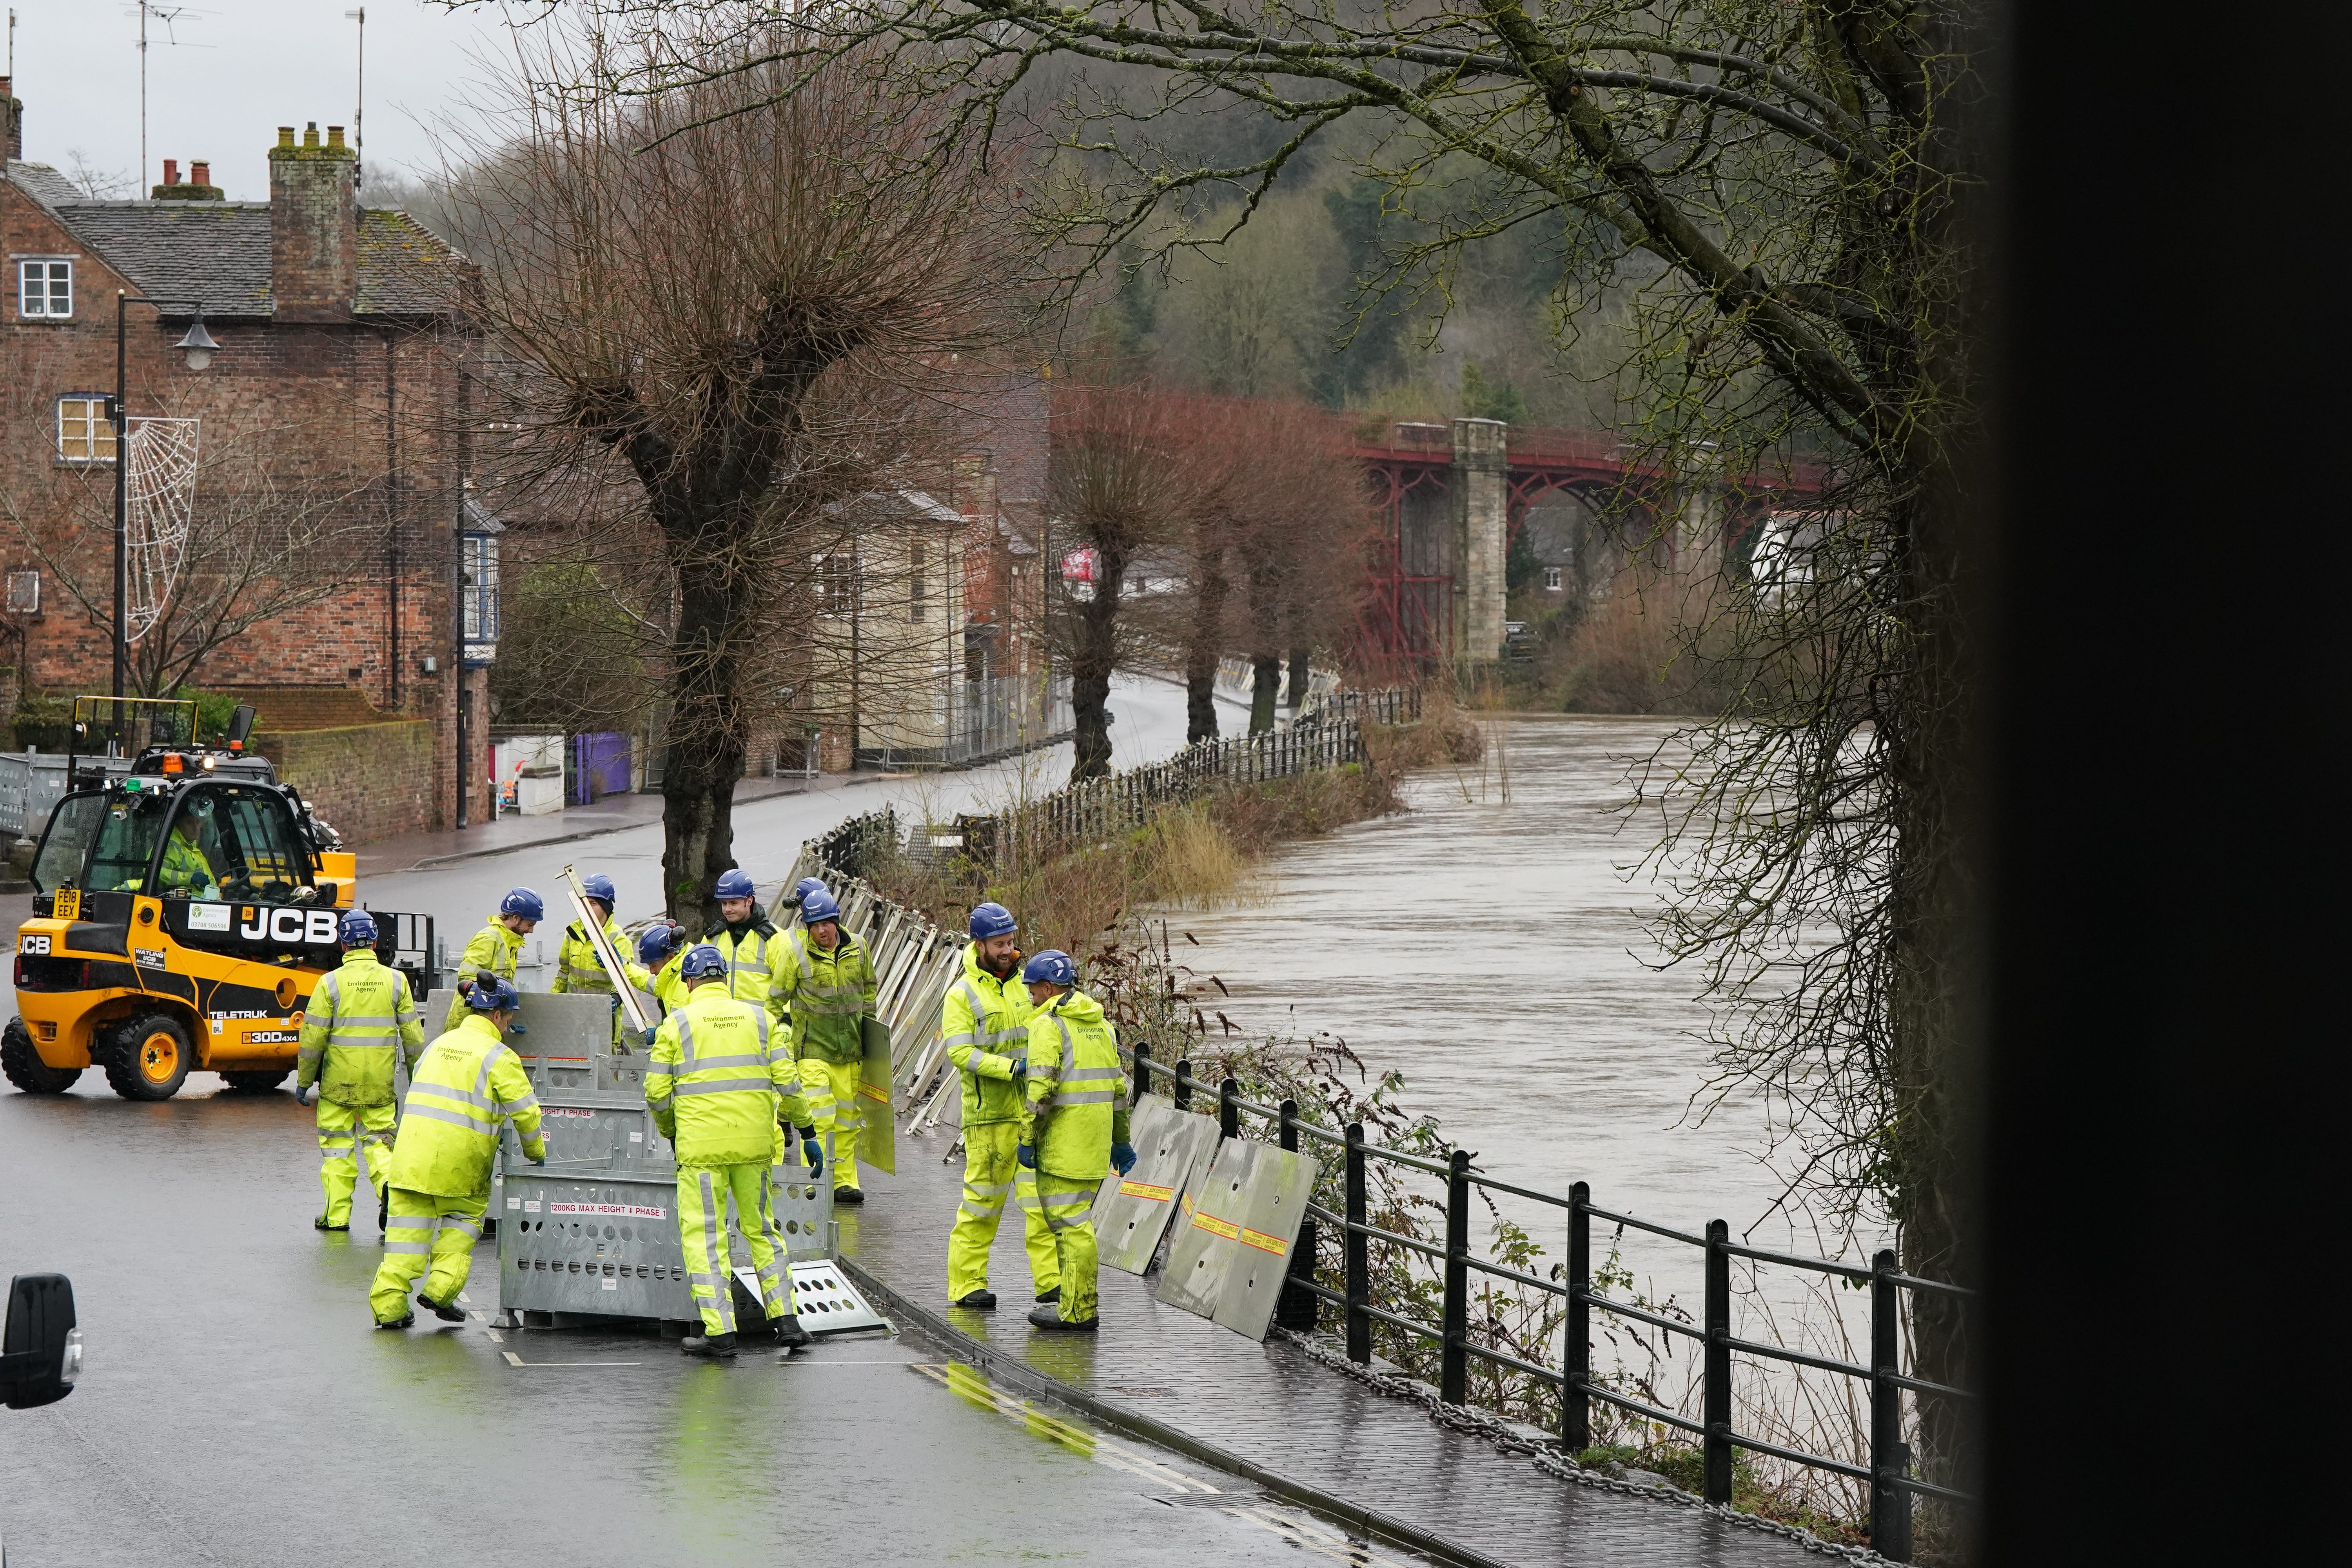 pThe River Severn has risen, causing flood defences to be put in place along the wharf at Ironbridge/p